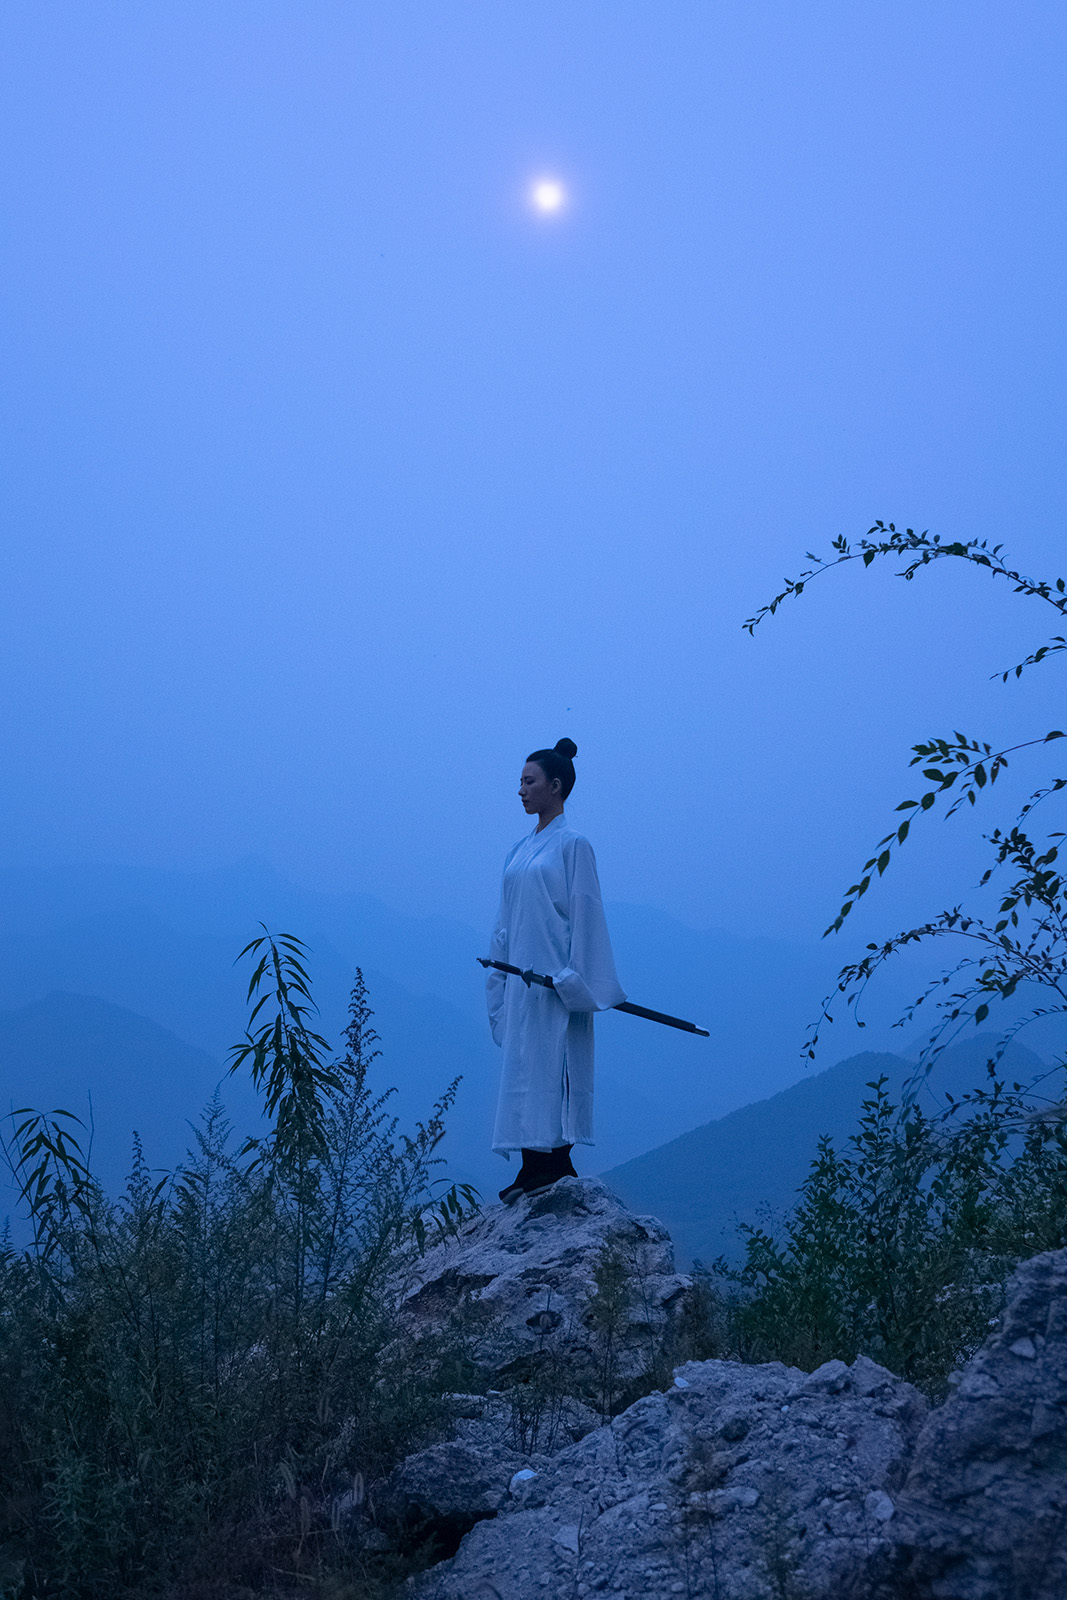 A samurai figure stands outside beneath an object in the evening sky